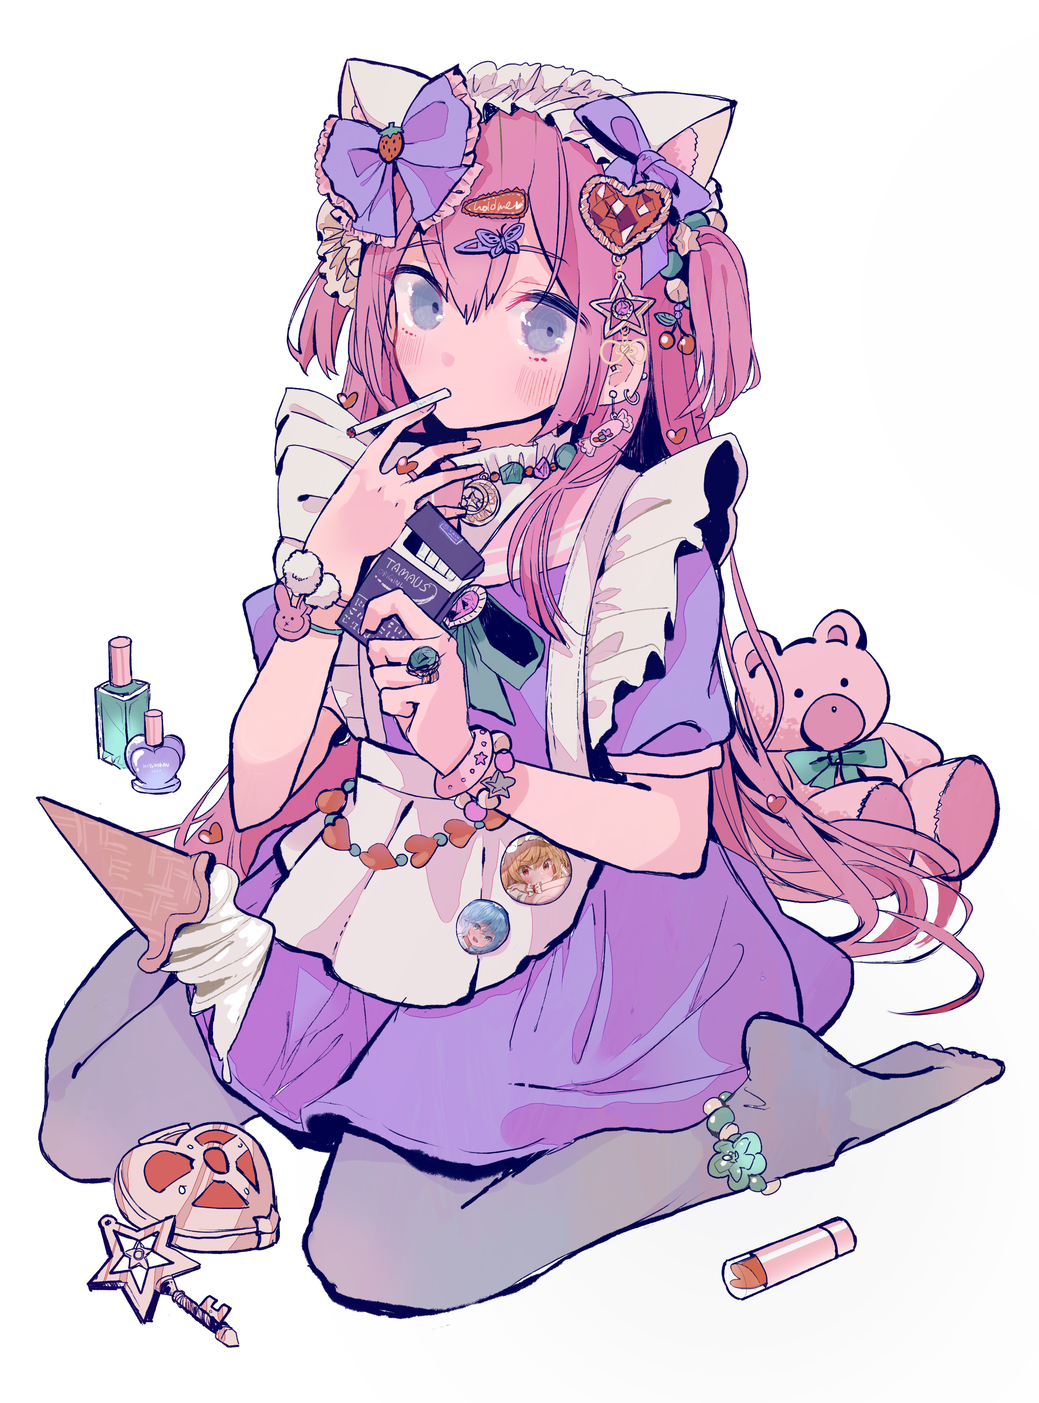 2D Anime Girls Cigarettes Smoking Vertical Maid Maid Outfit Teddy Bears Perfume Lipstick Earring Whi 1039x1403